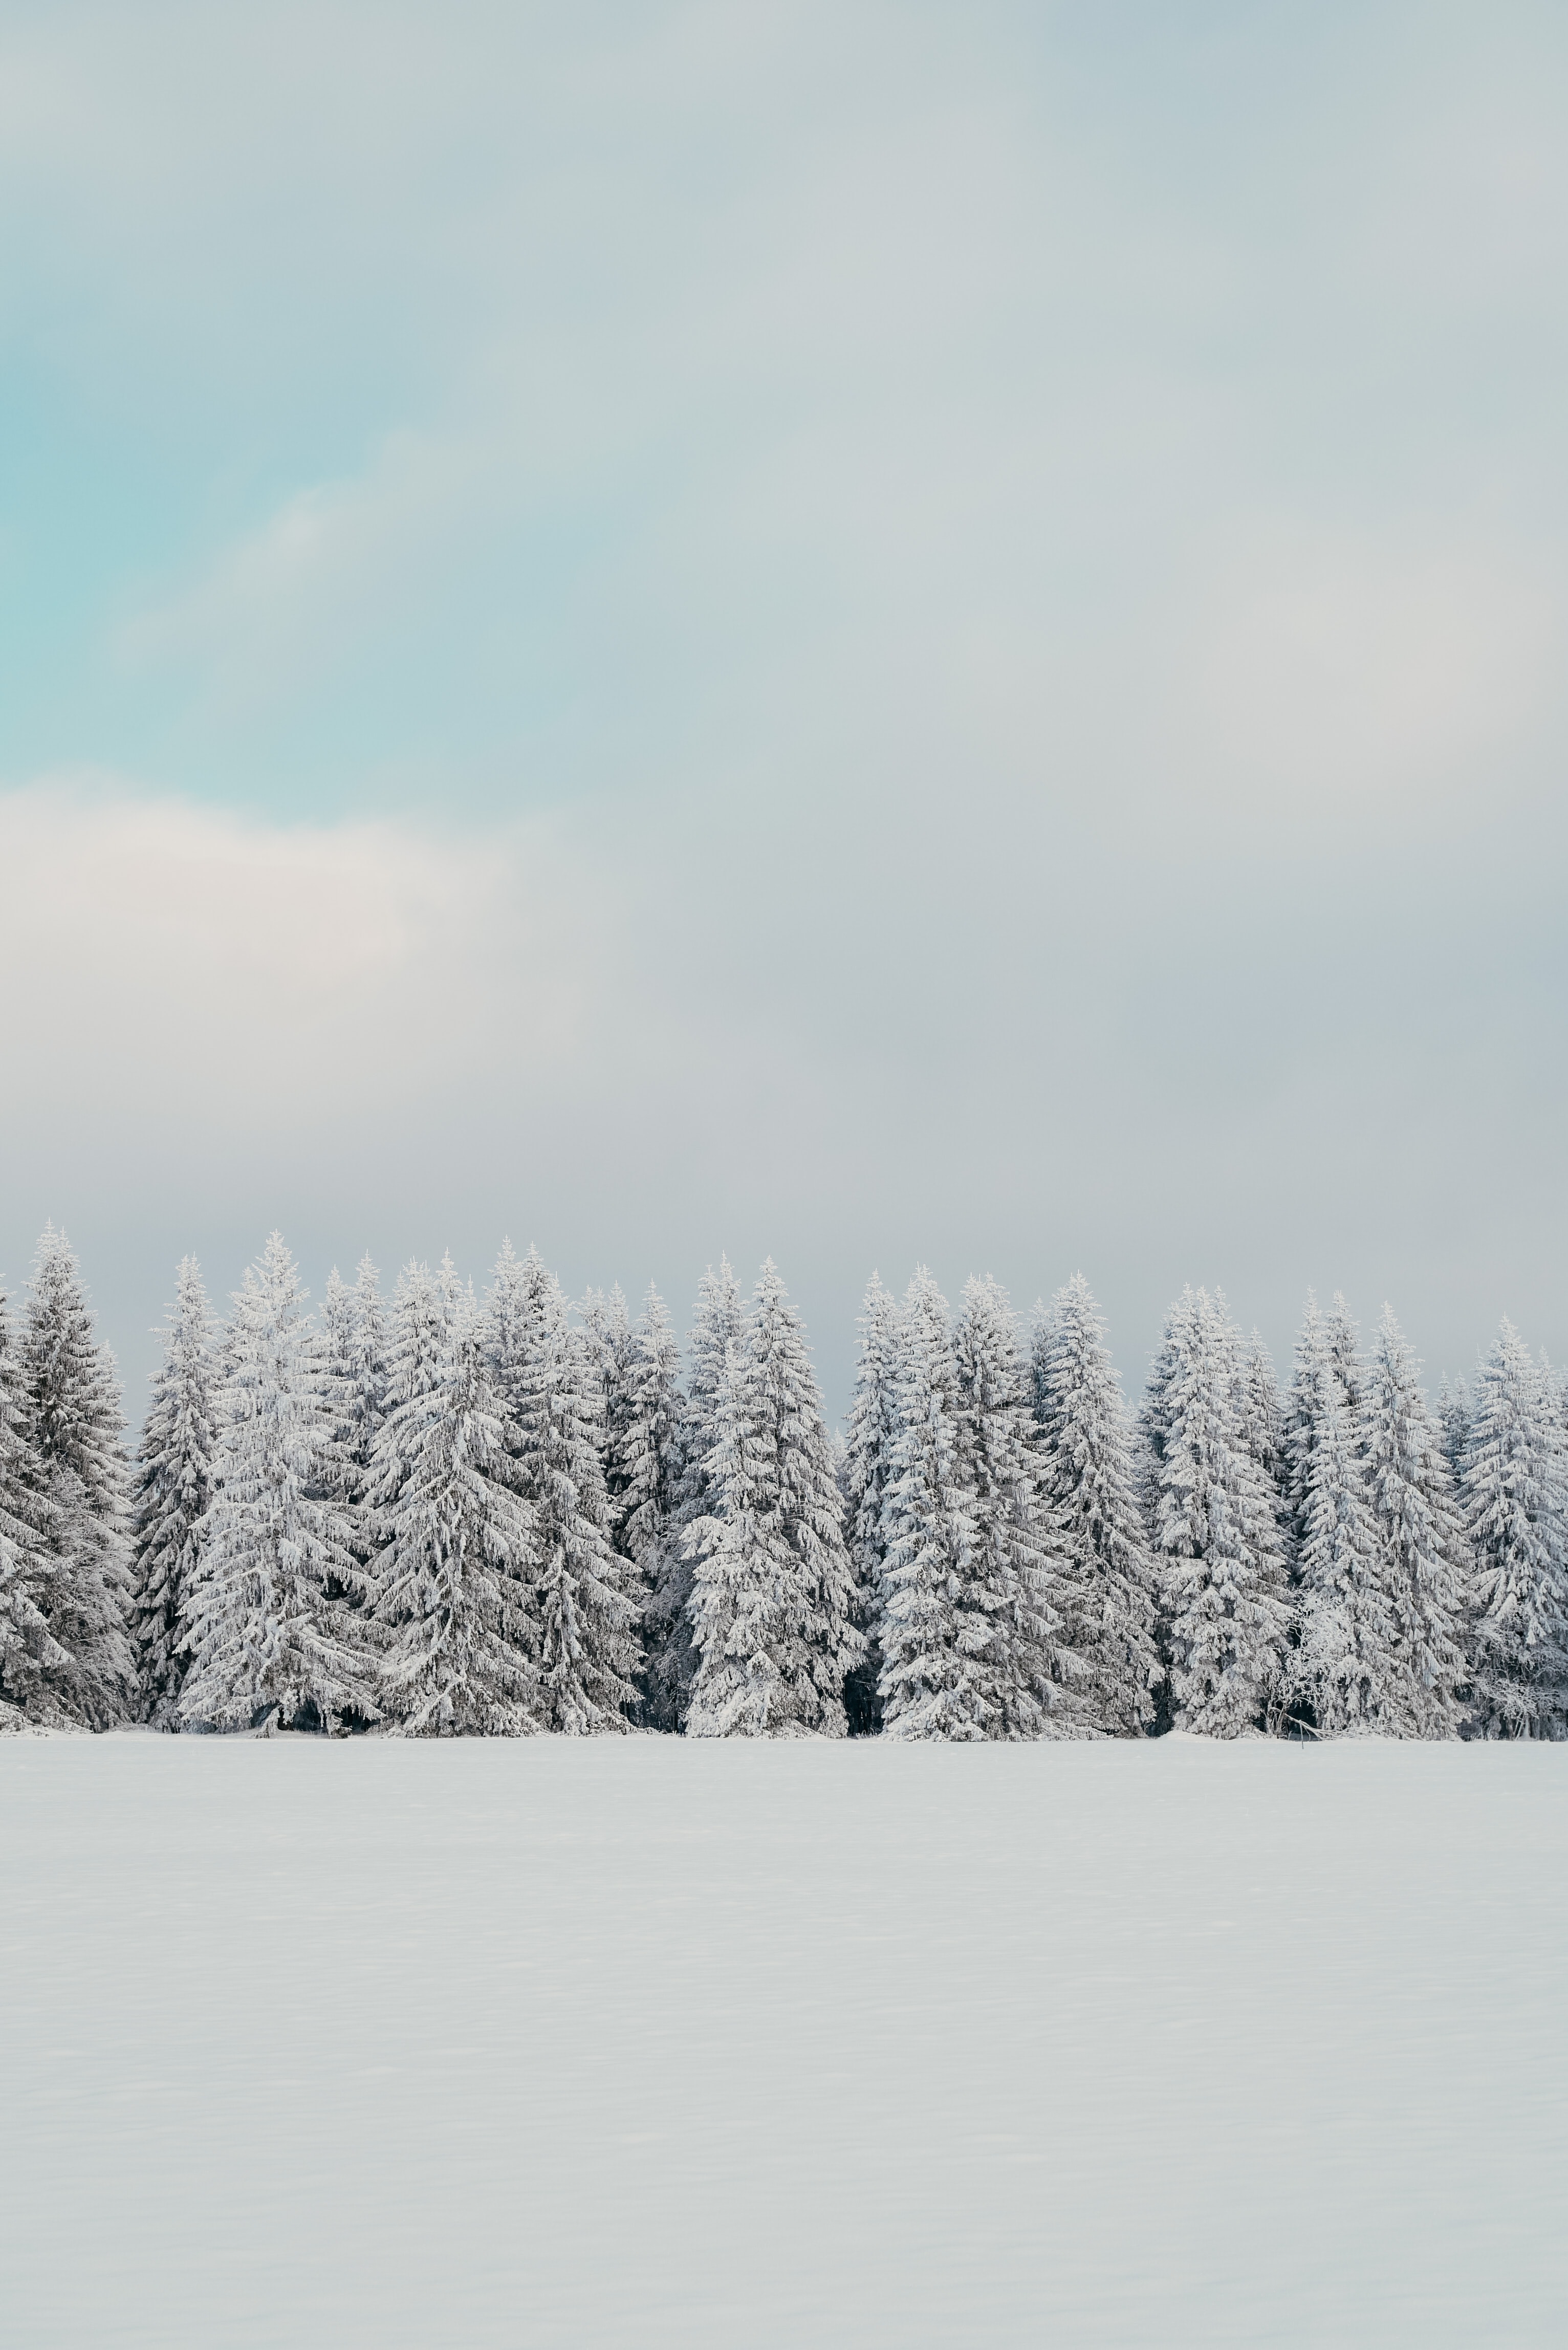 Windows Backgrounds winter, nature, trees, snow, fir trees, white